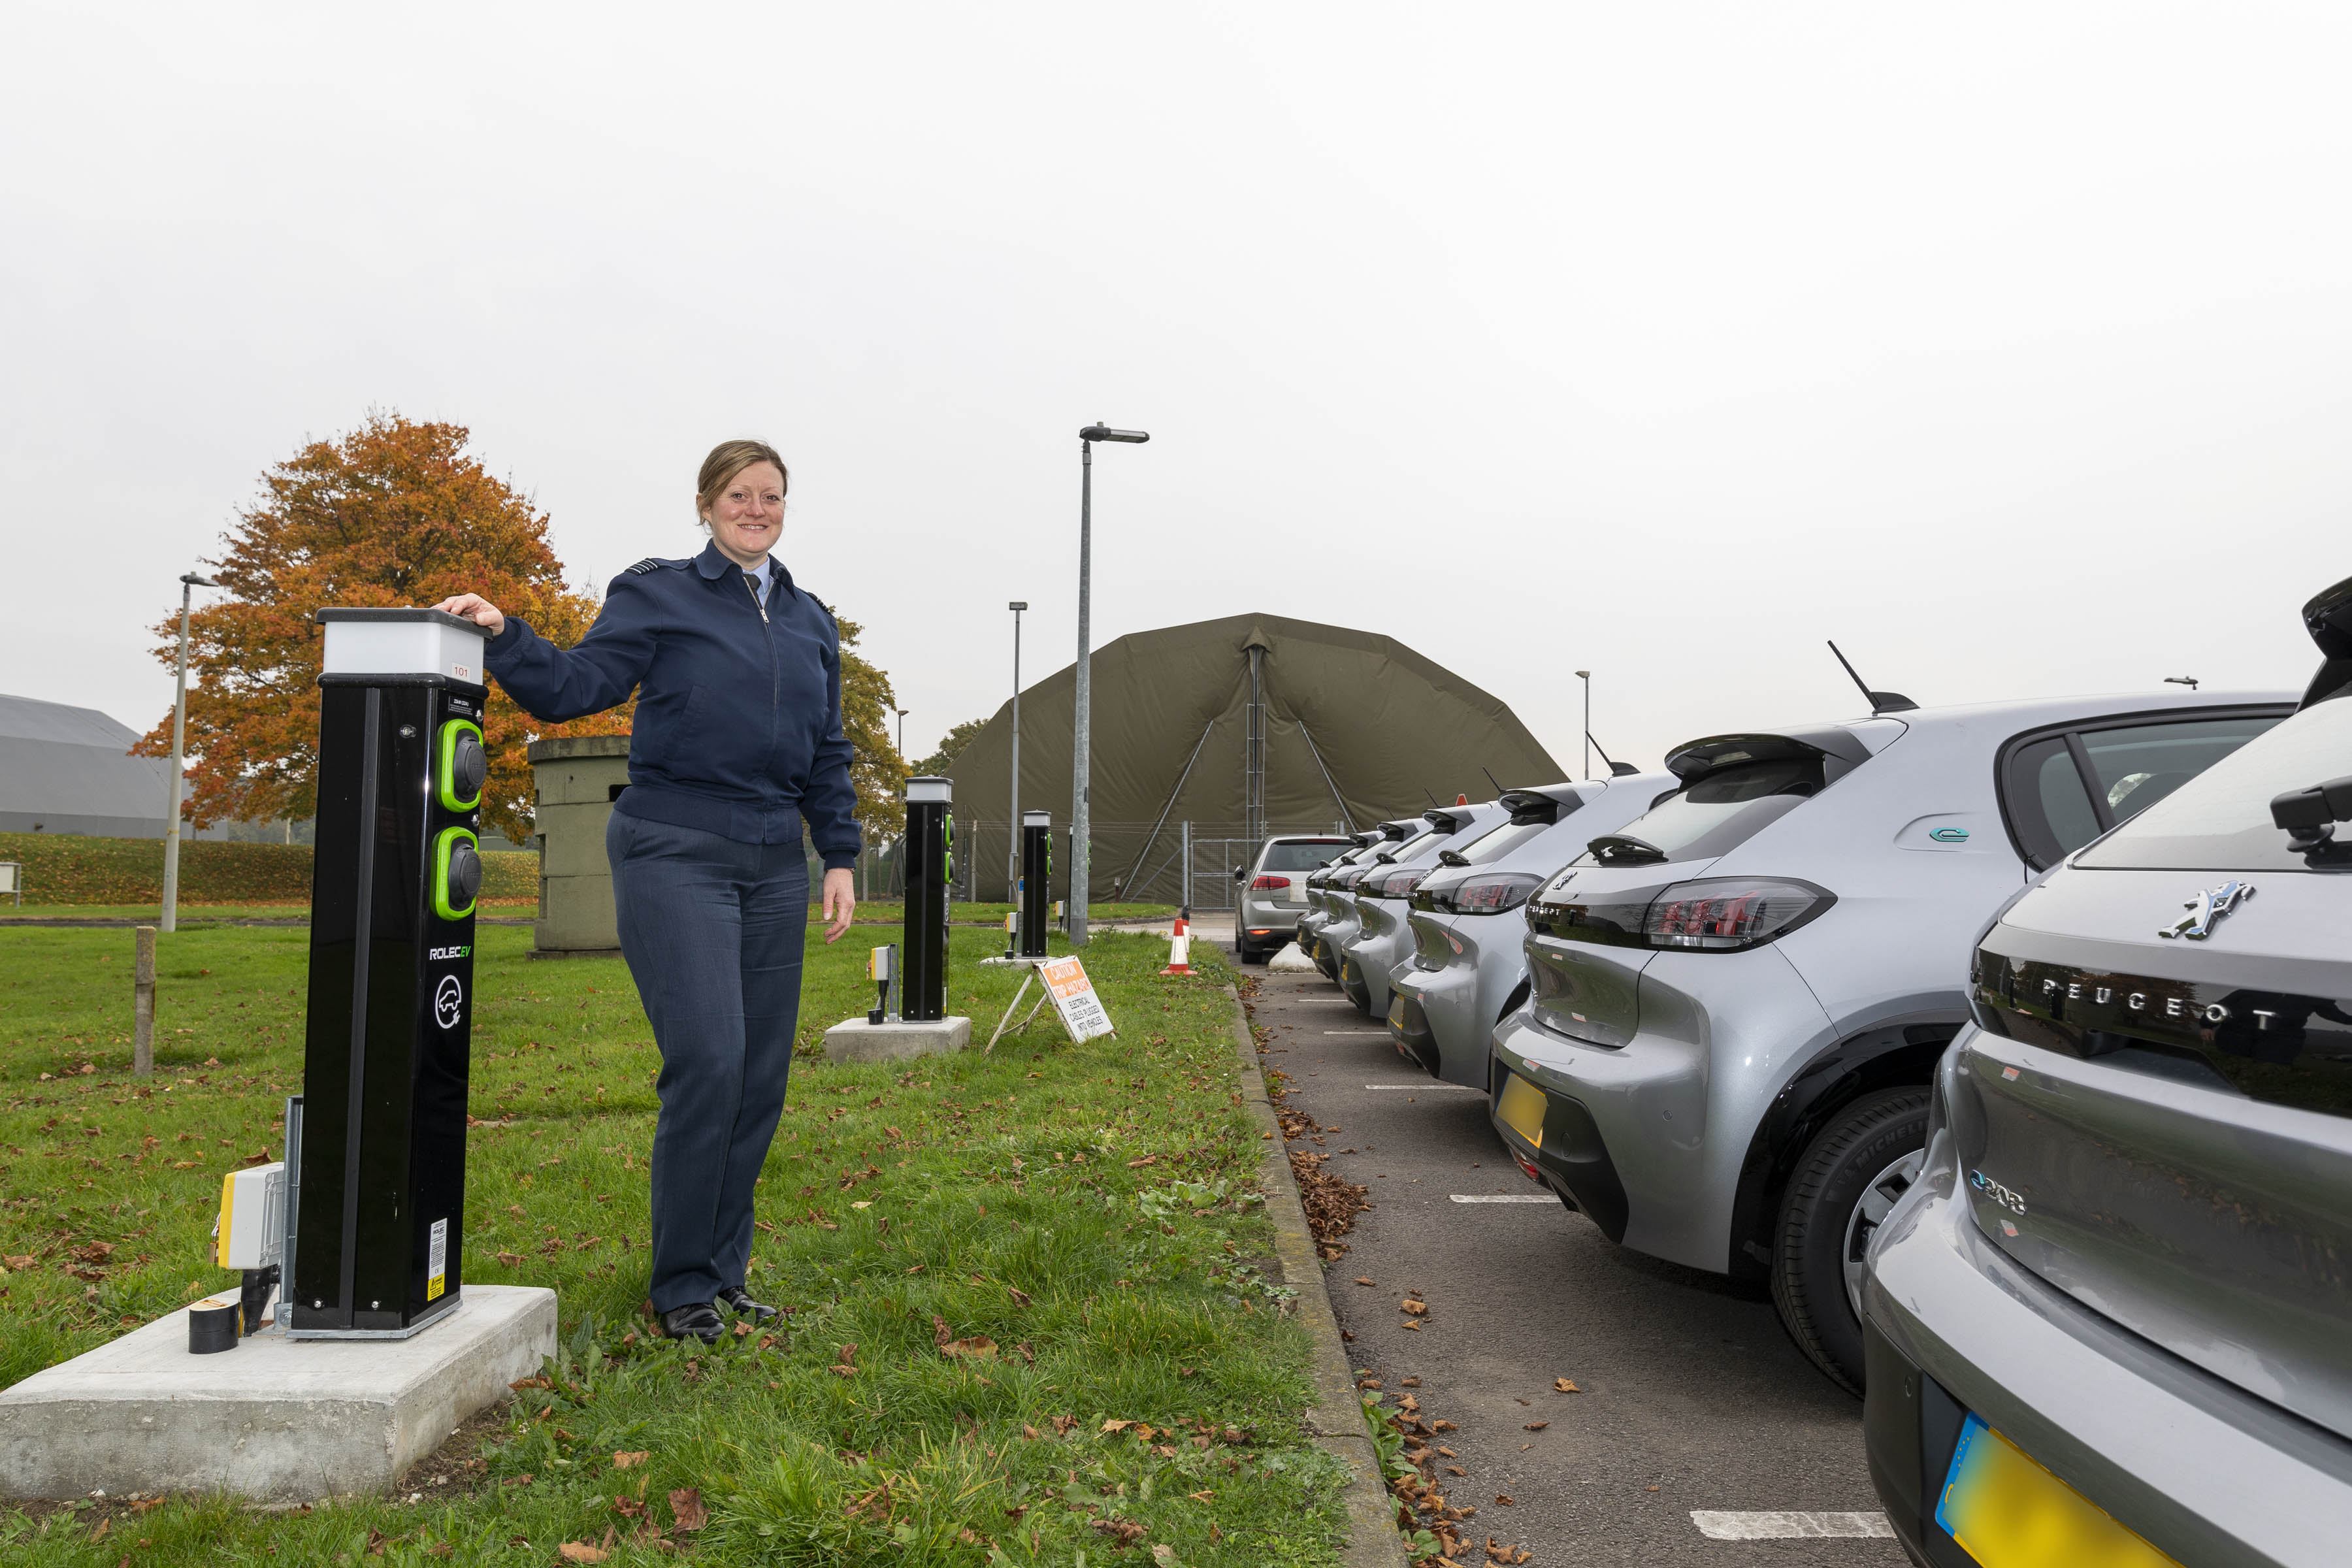 Image shows aviator standing by electric charging station in car park.